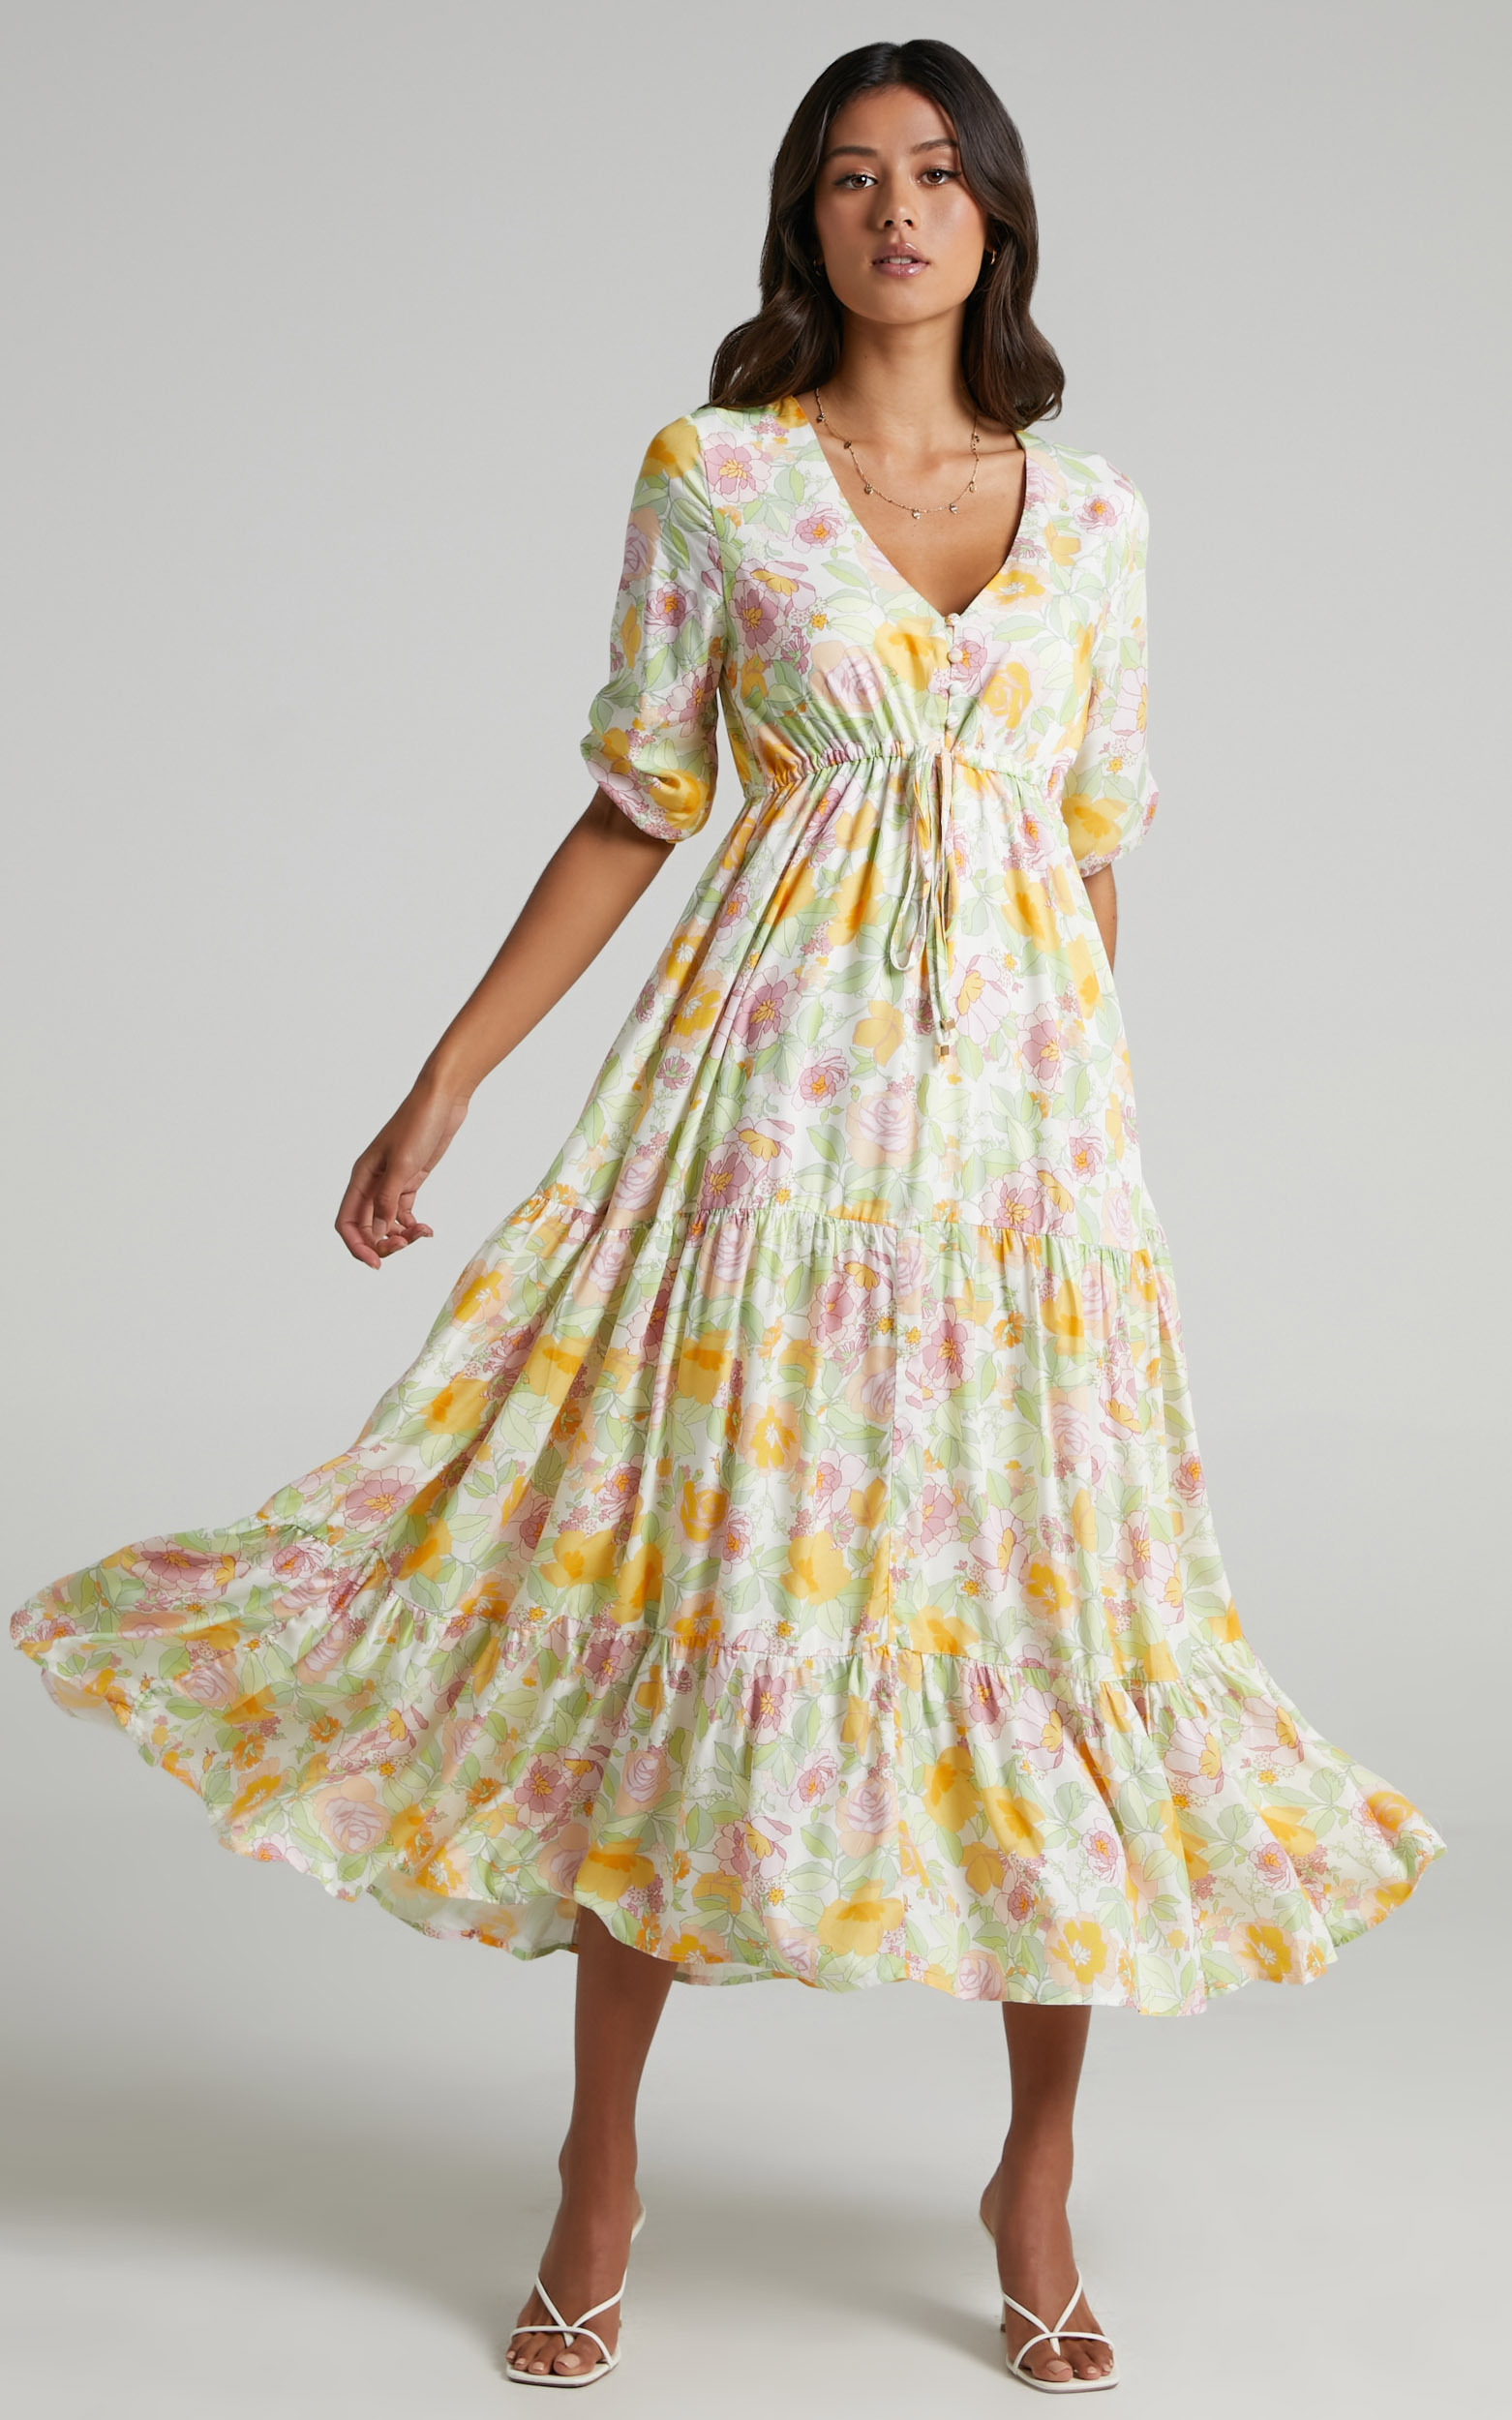 Lilibelle Dress in Linear Floral - 06, WHT2, hi-res image number null